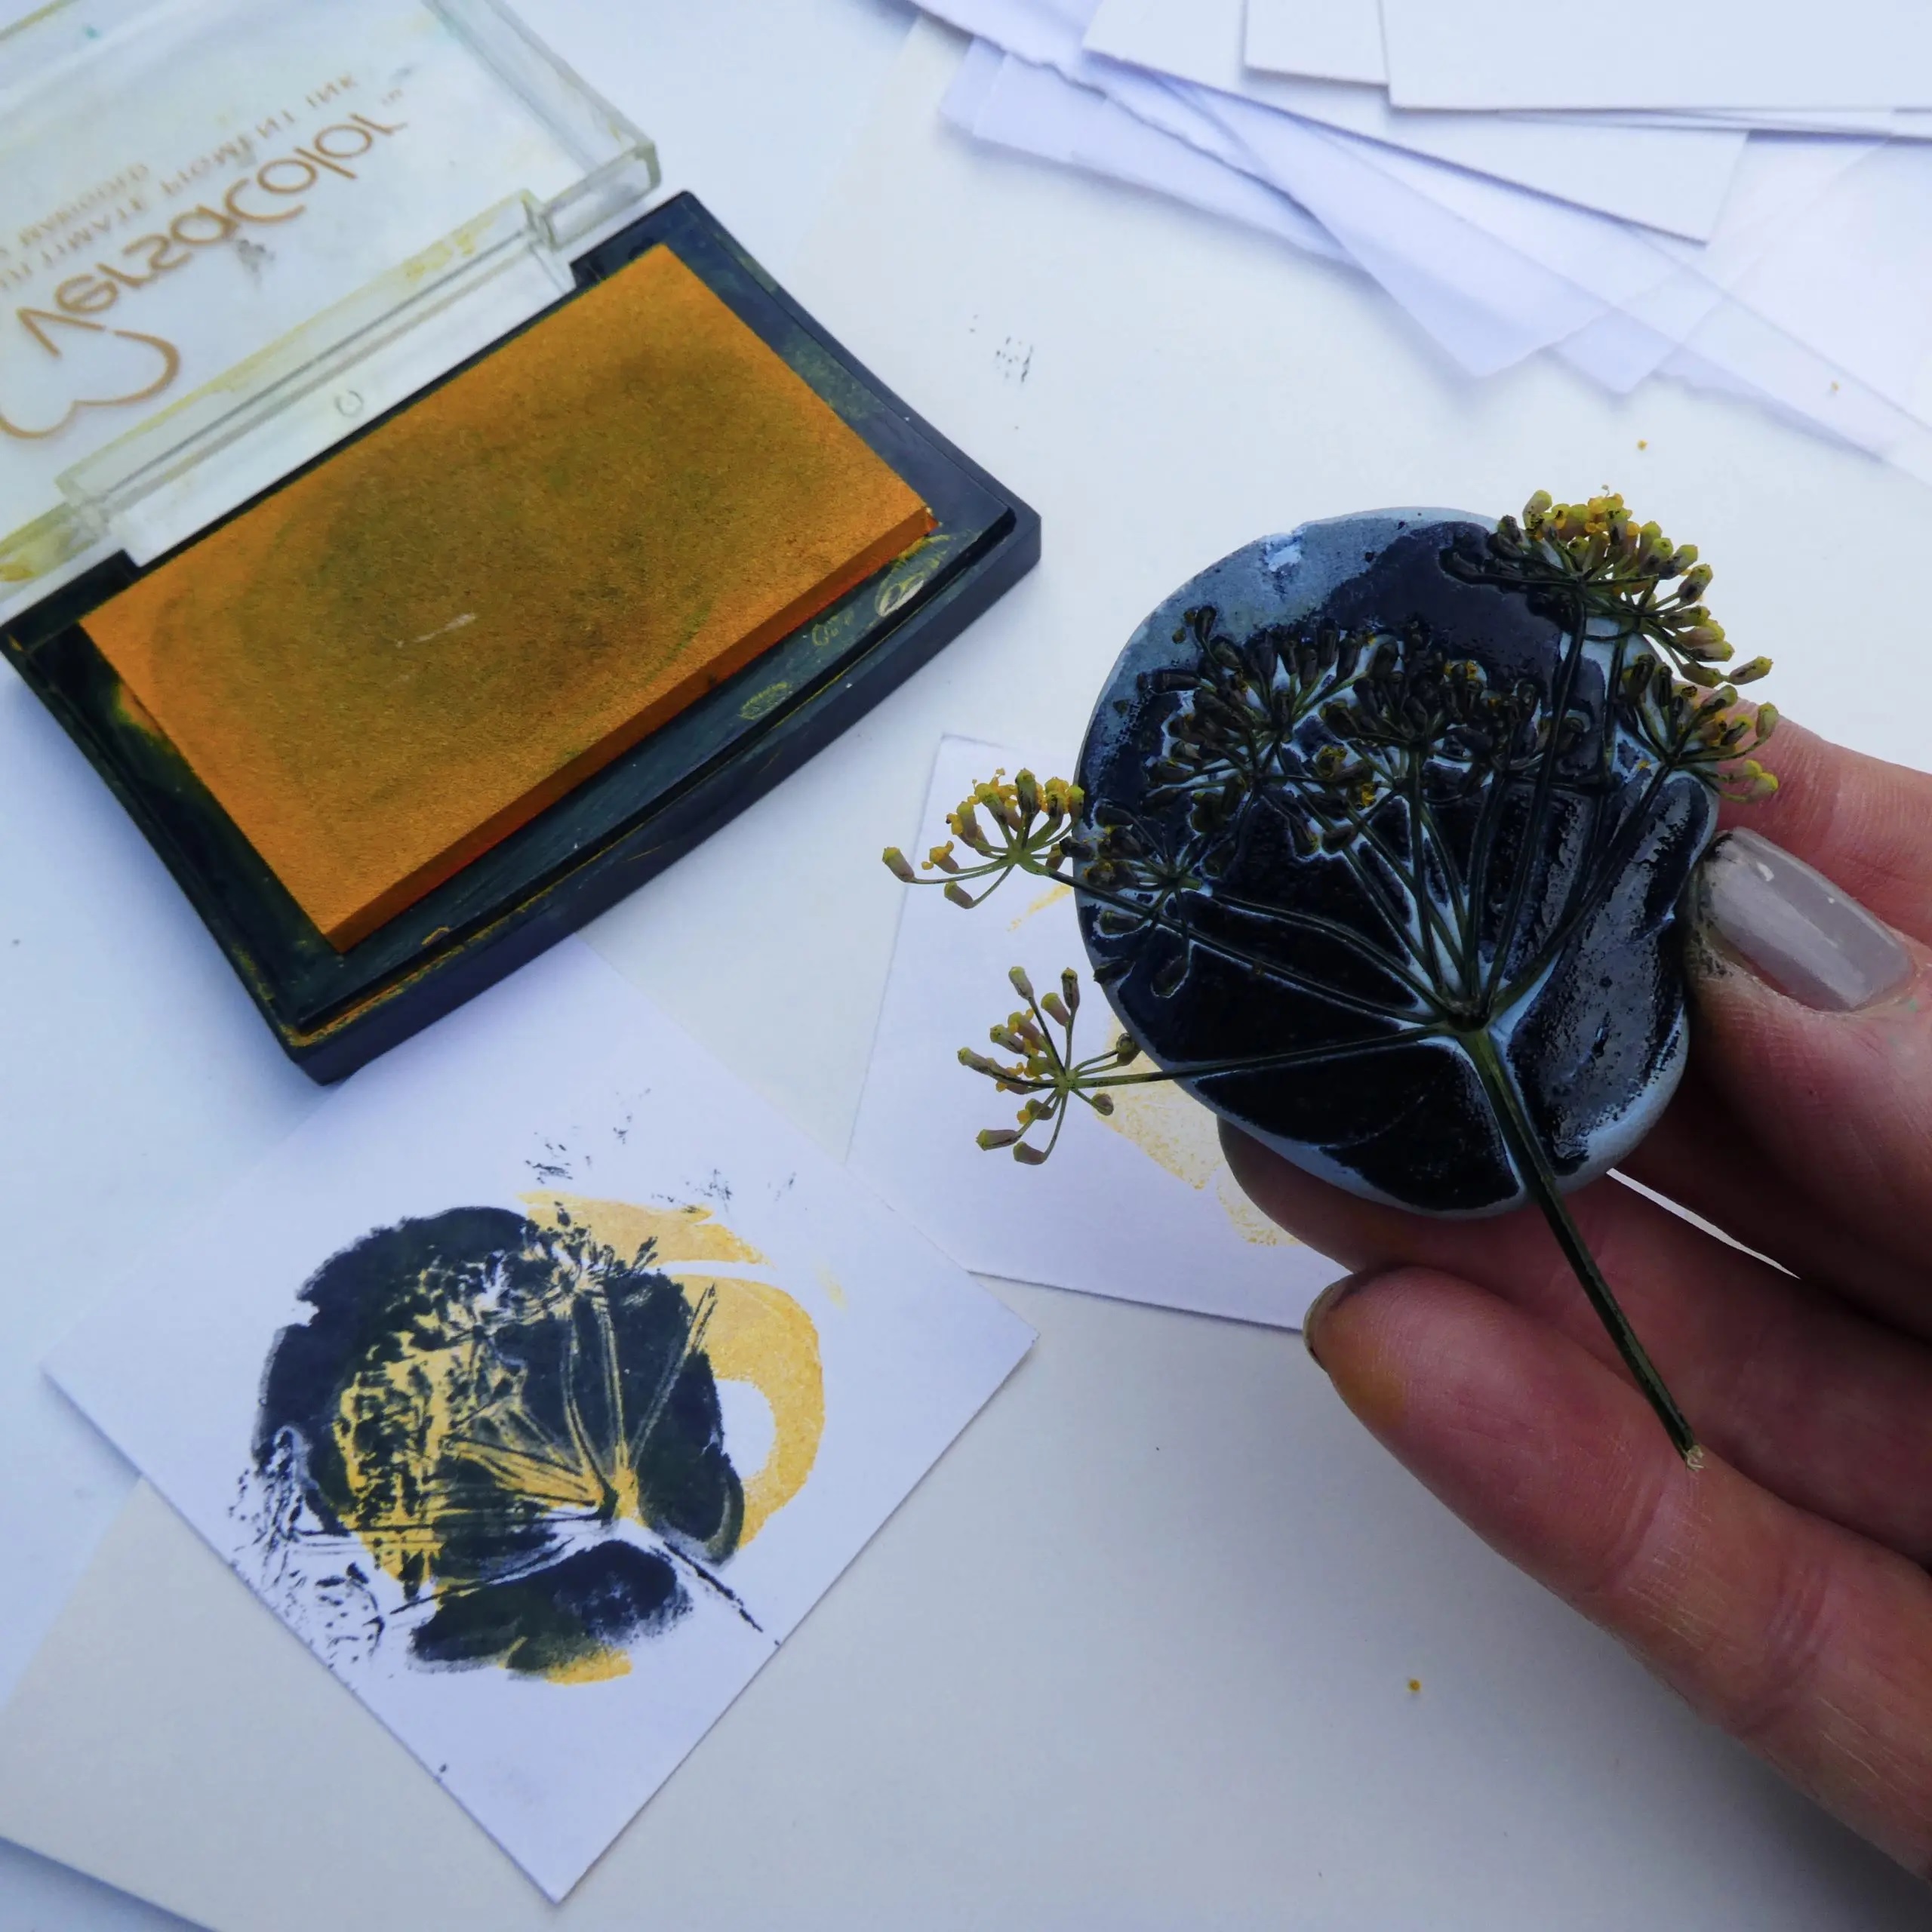 A hand holds an inked up Blutack with seed head and in front is the print made using it